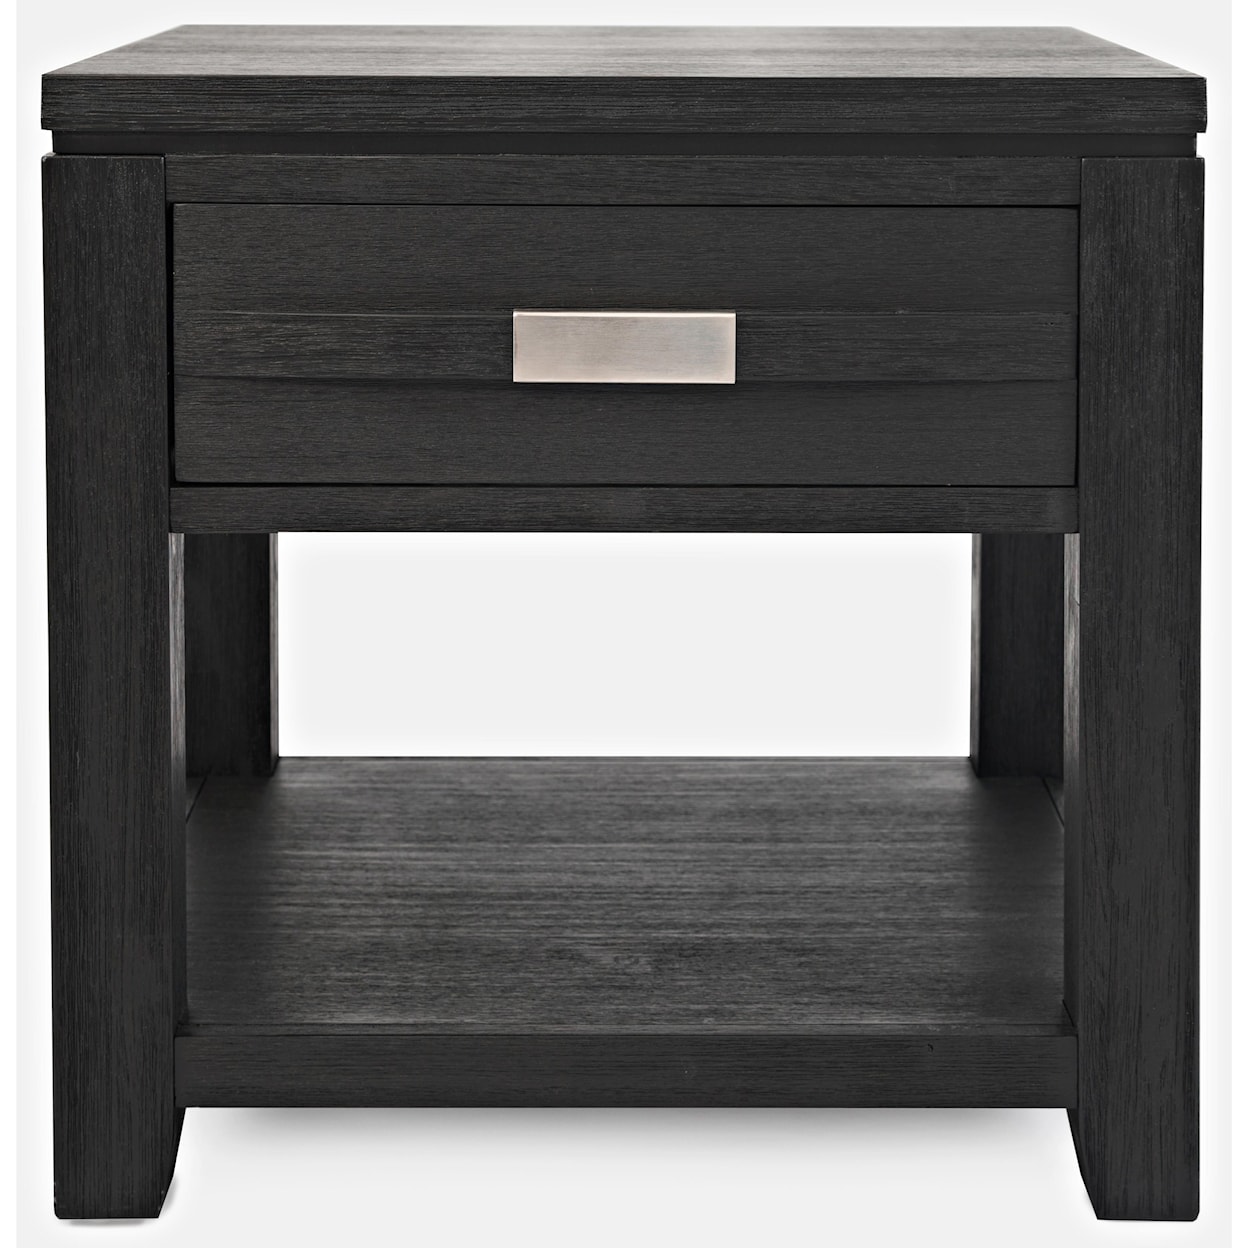 Jofran Altamonte - 1850 End Table with Shelf